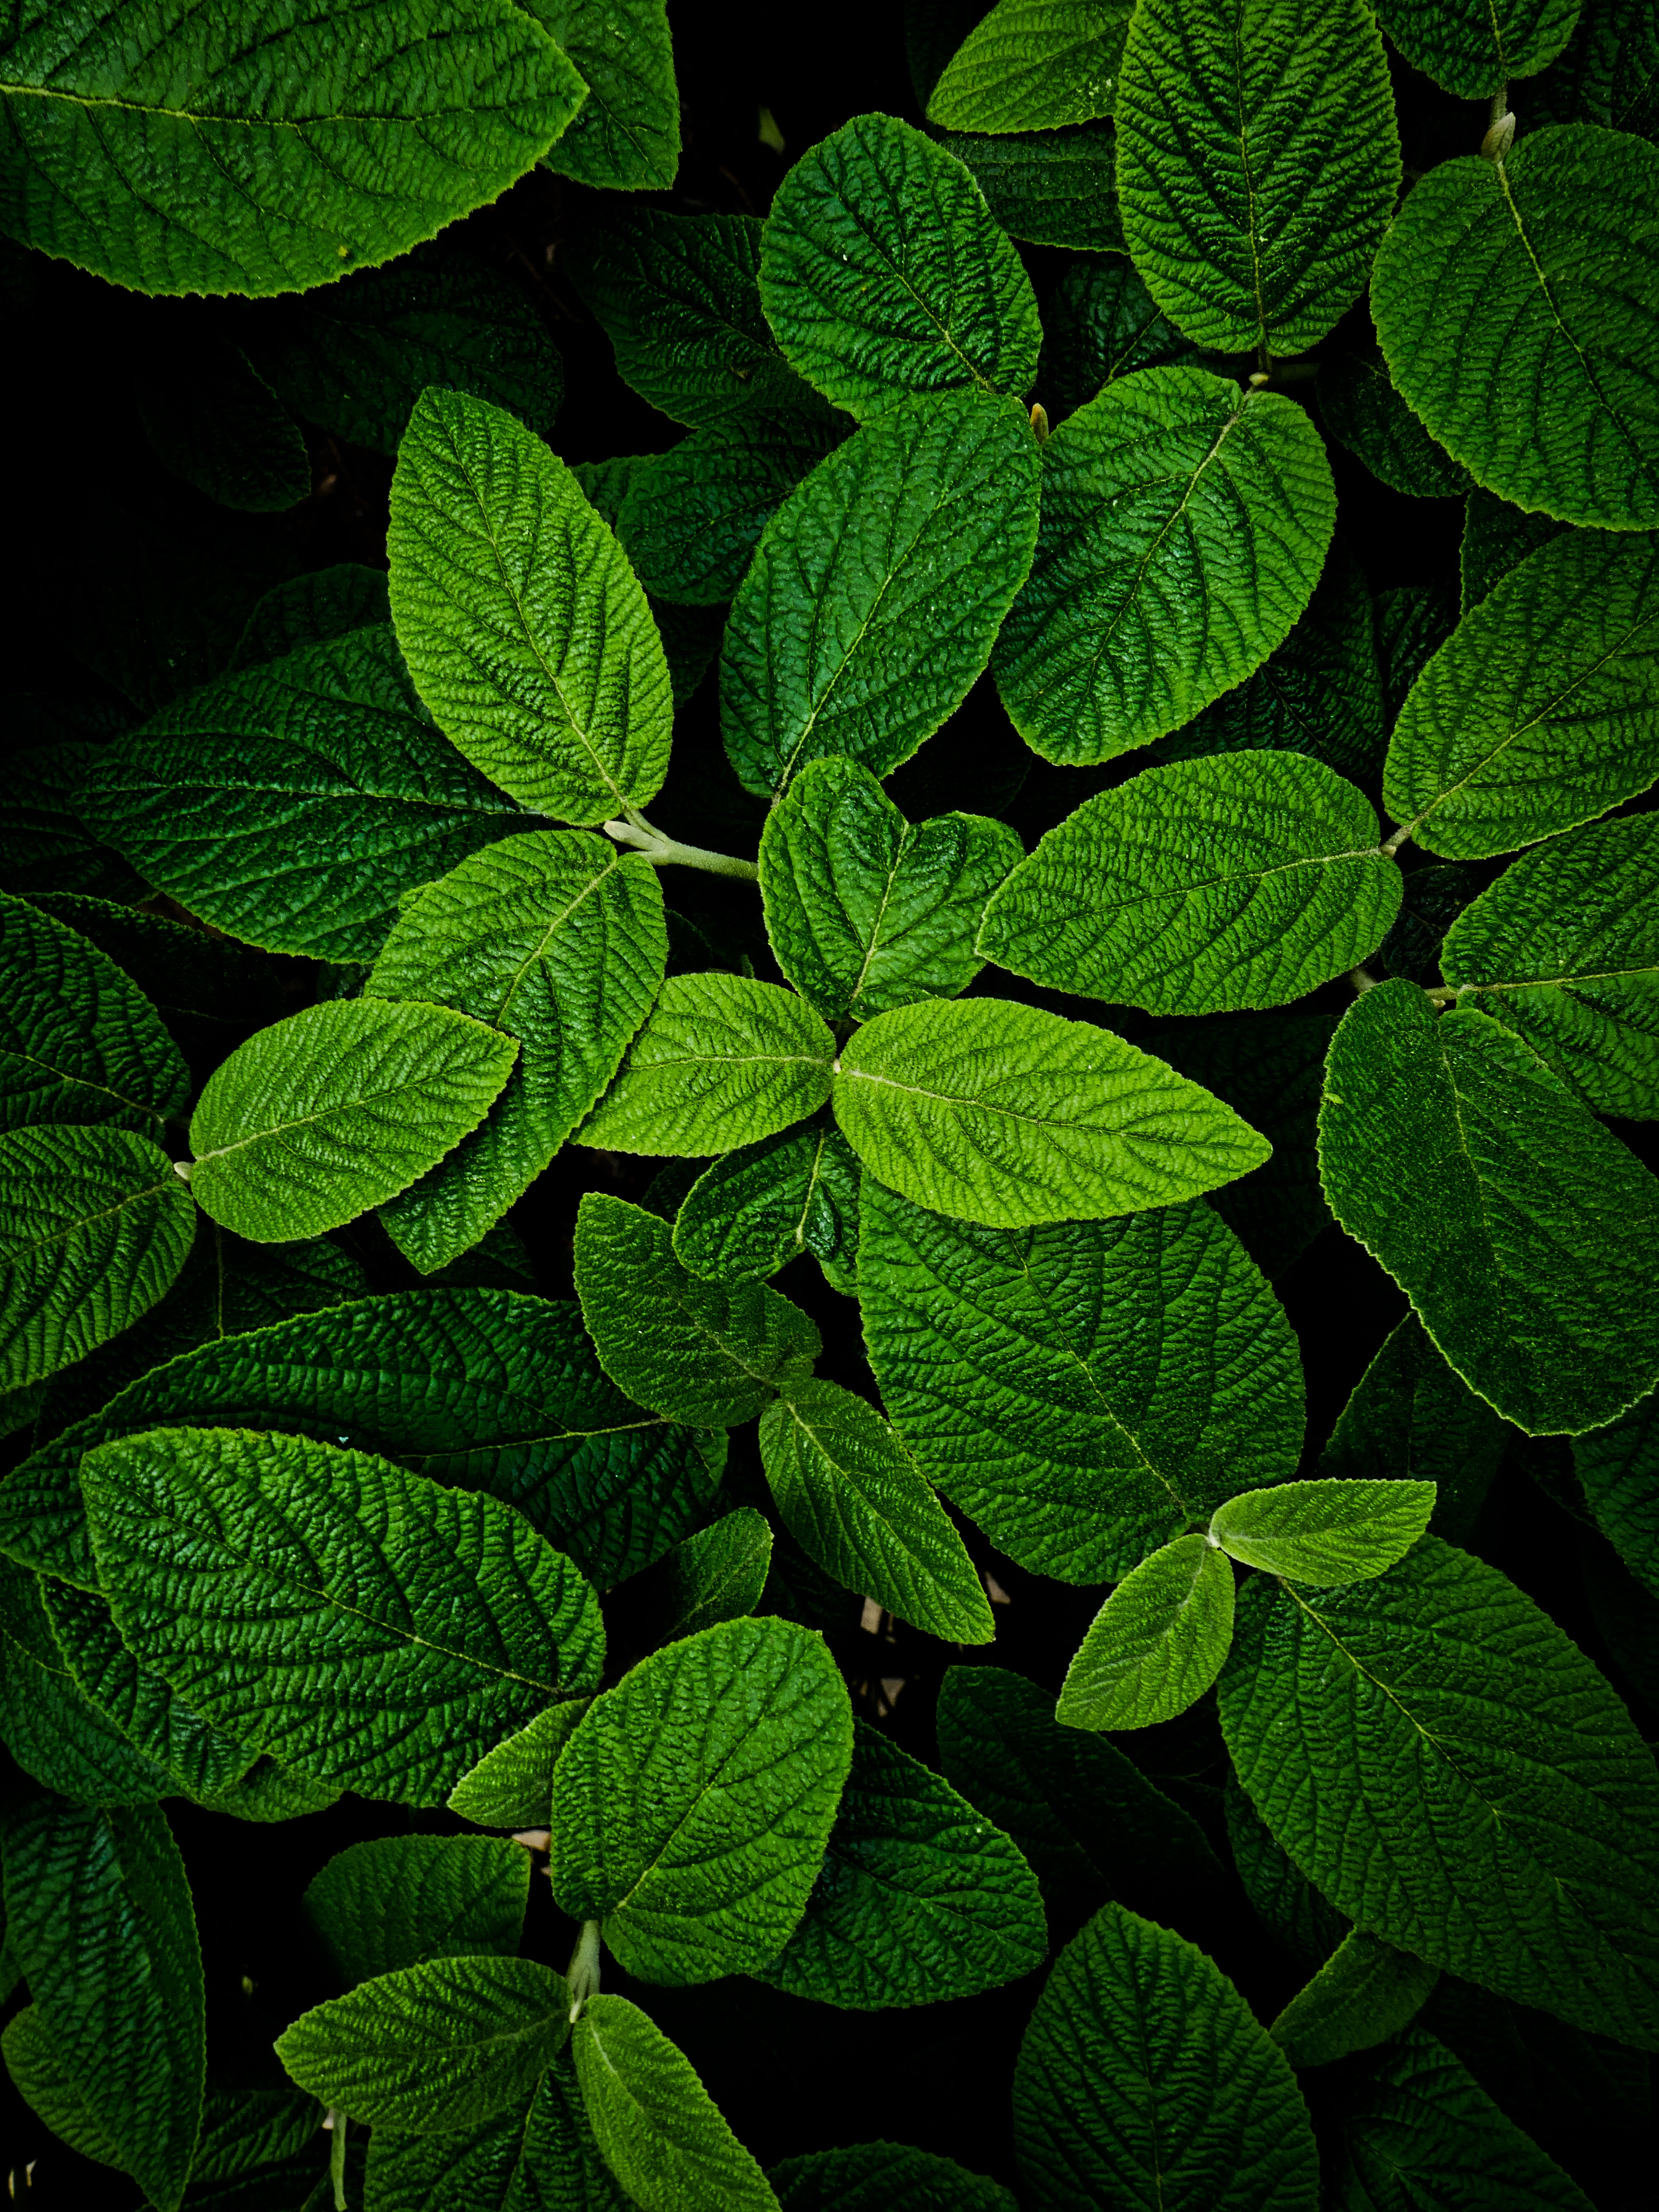 Popular Green Image for Phone